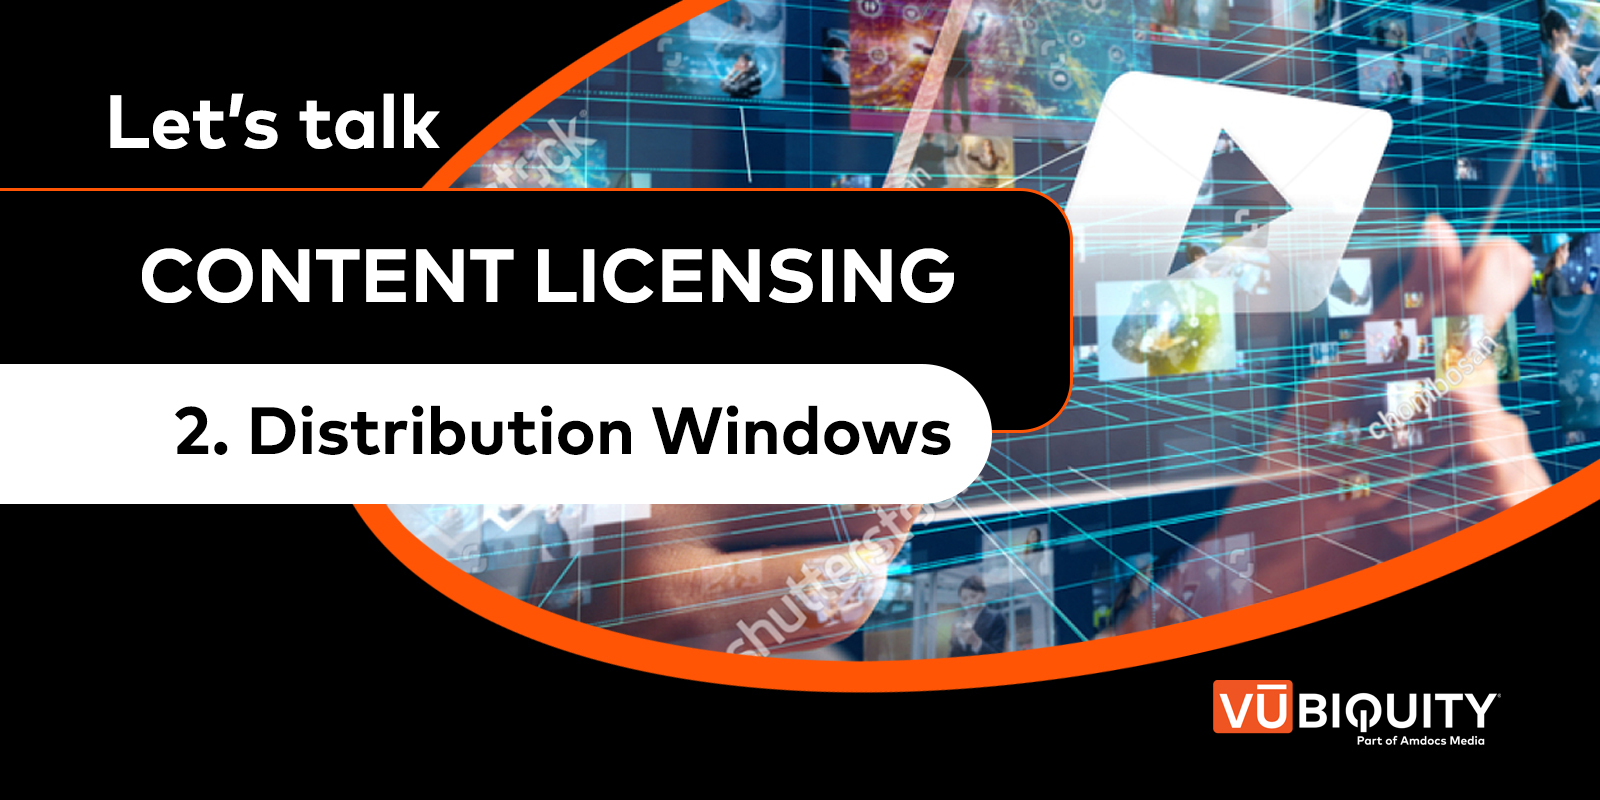 Content Licensing - Distribution Windows